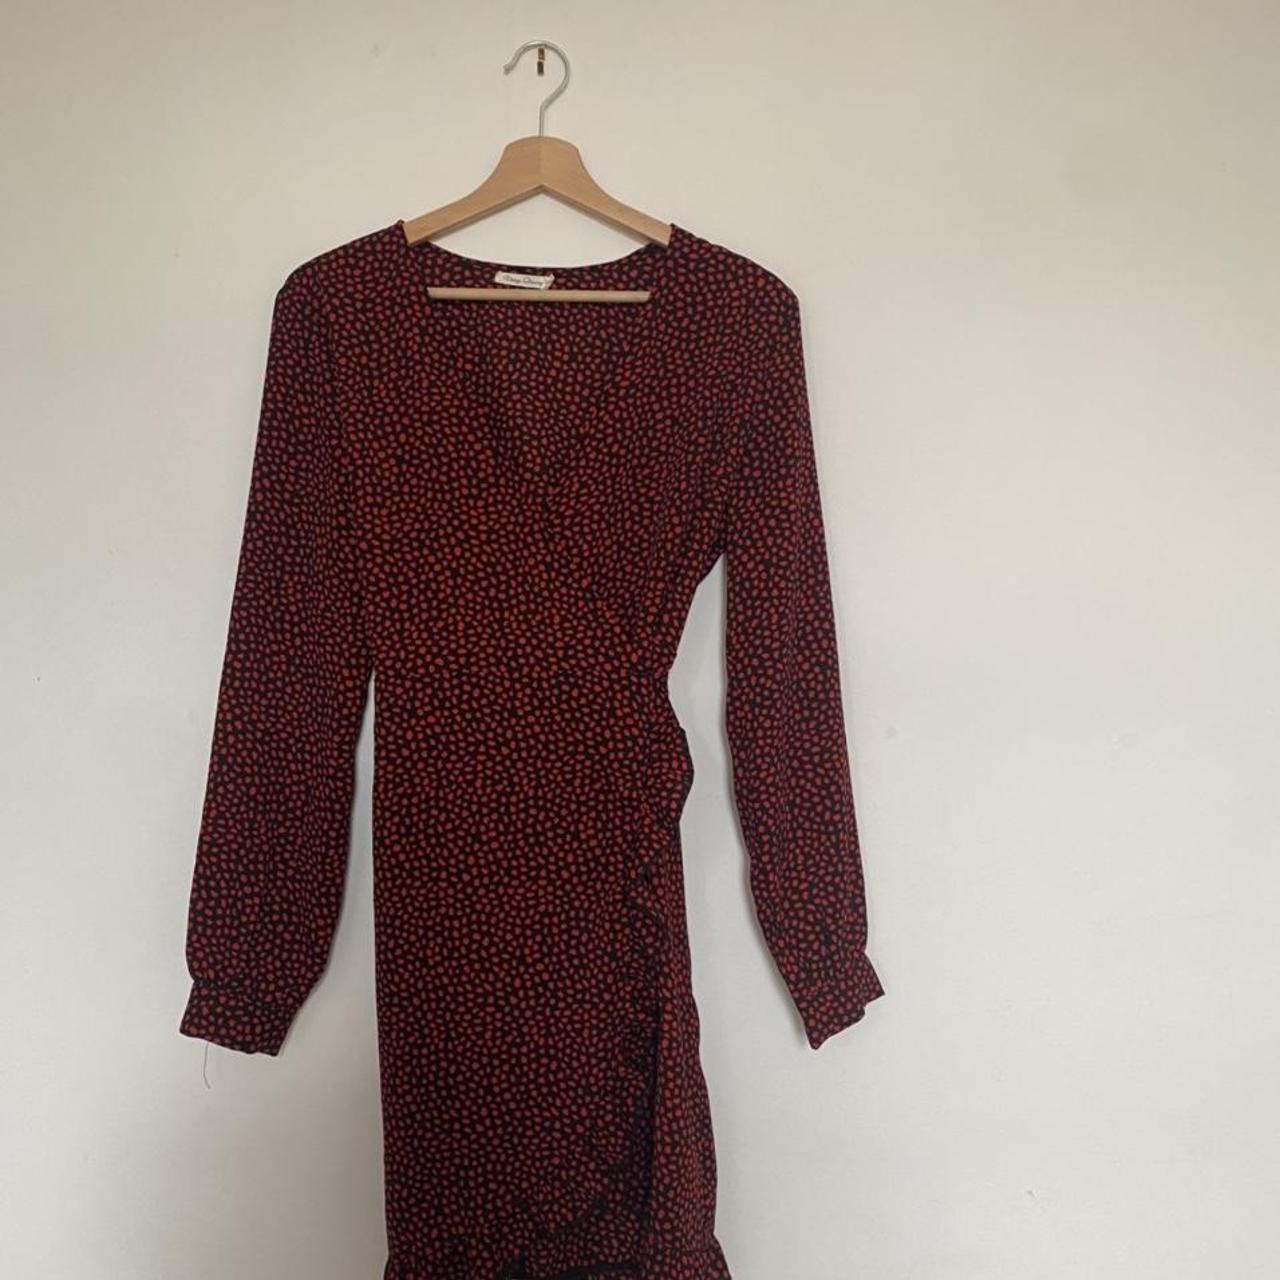 Anthropologie black and red wrap dress, size... - Depop